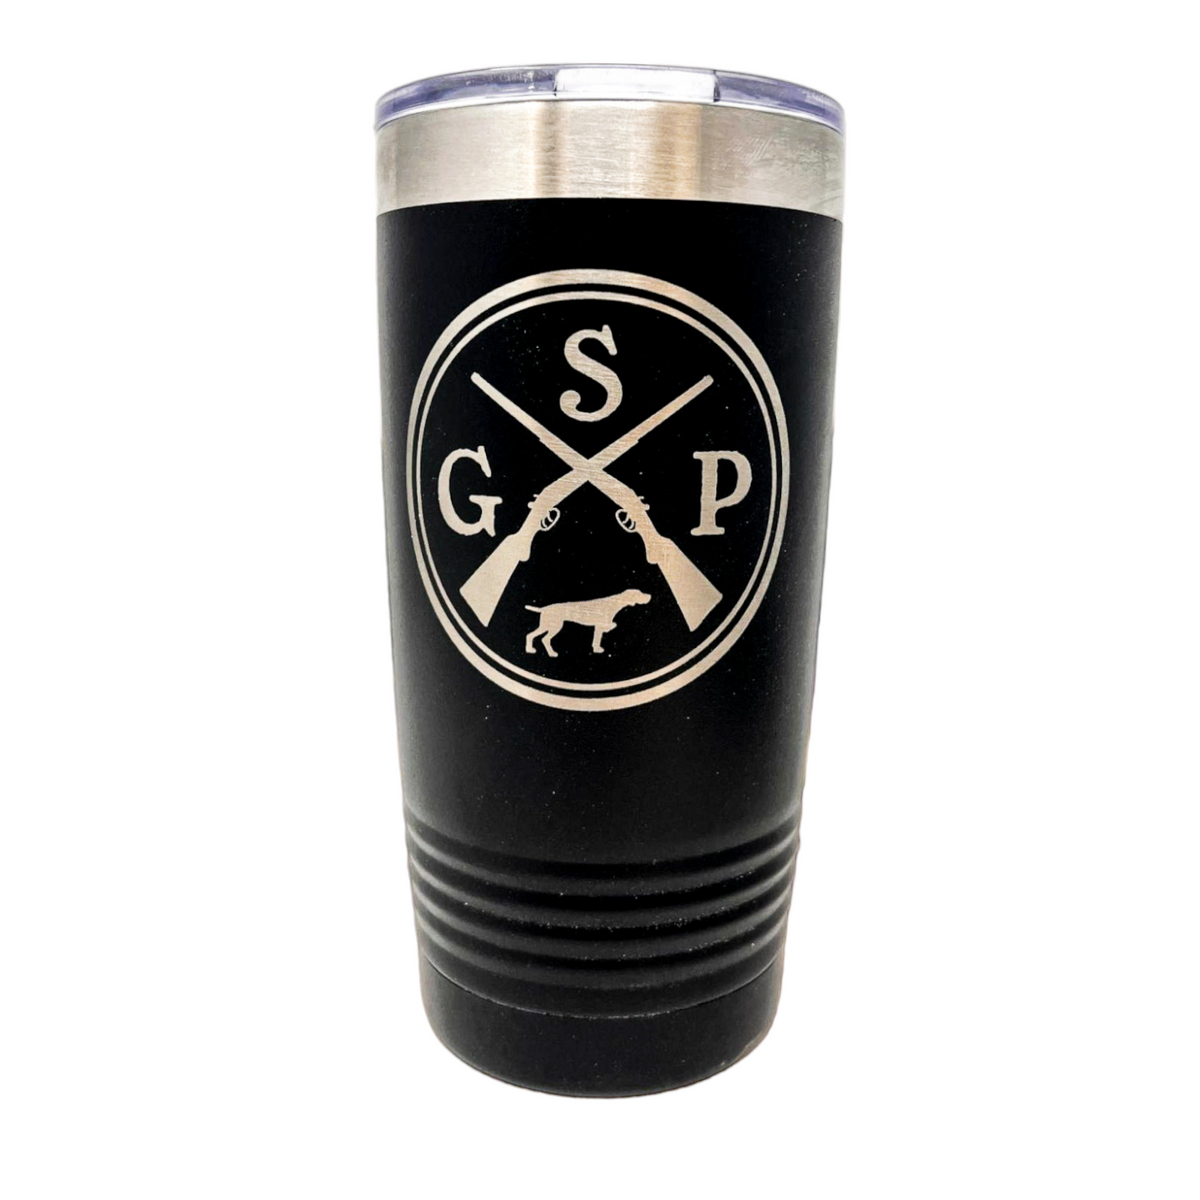 https://cdn.shopify.com/s/files/1/0606/5497/7184/products/wind-river-outpost-gsp-tumbler_1200x.png?v=1679173001